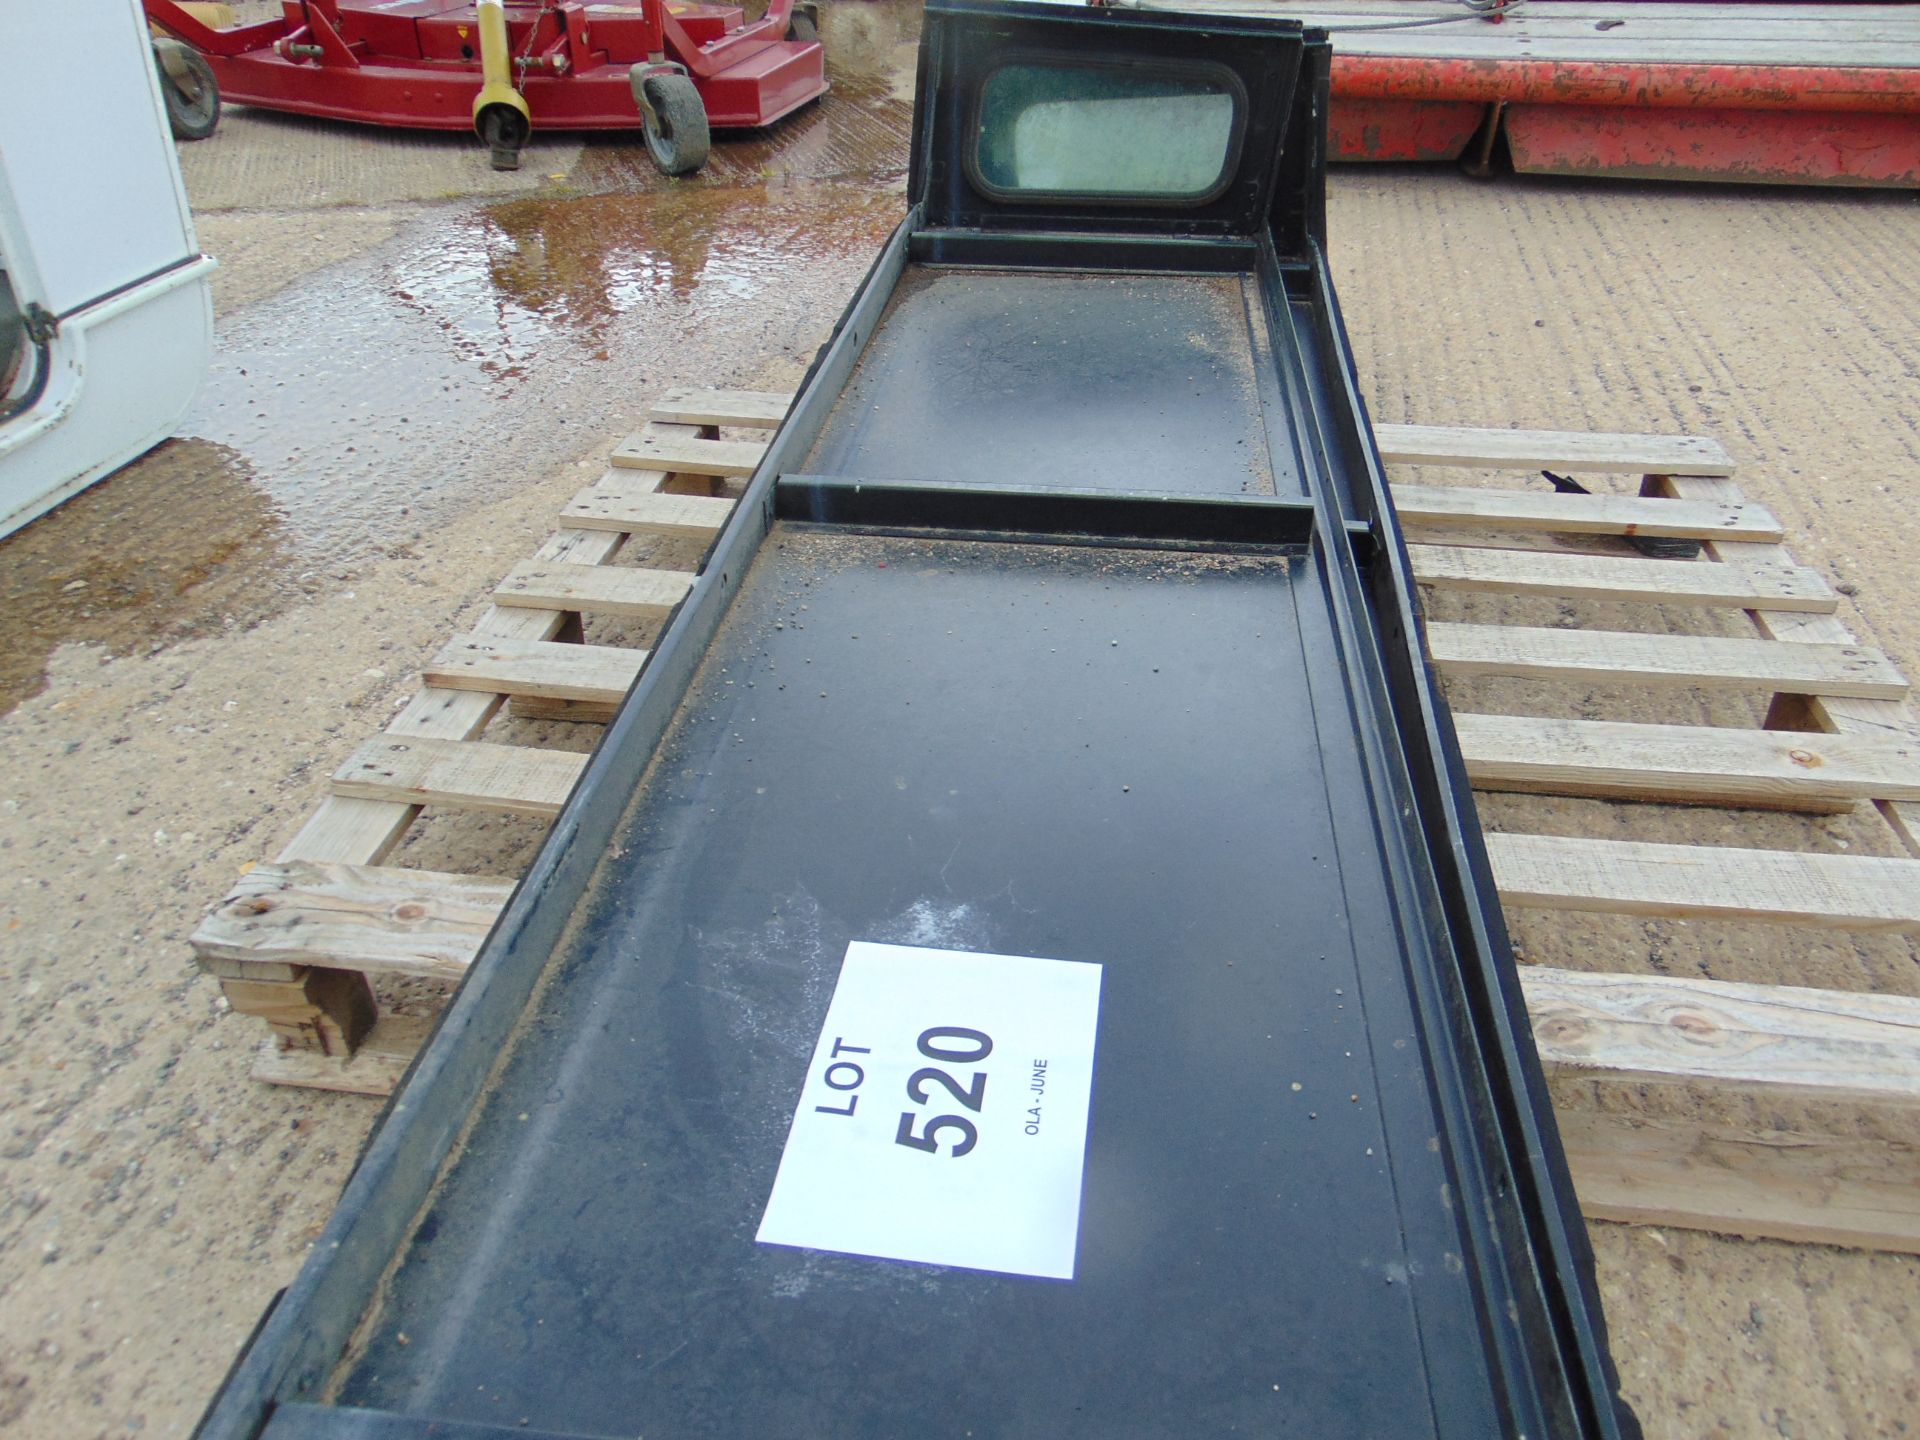 2X LAND ROVER 110 HARDTOP SIDE PANELS WITH REAR WINDOWS - Image 2 of 3